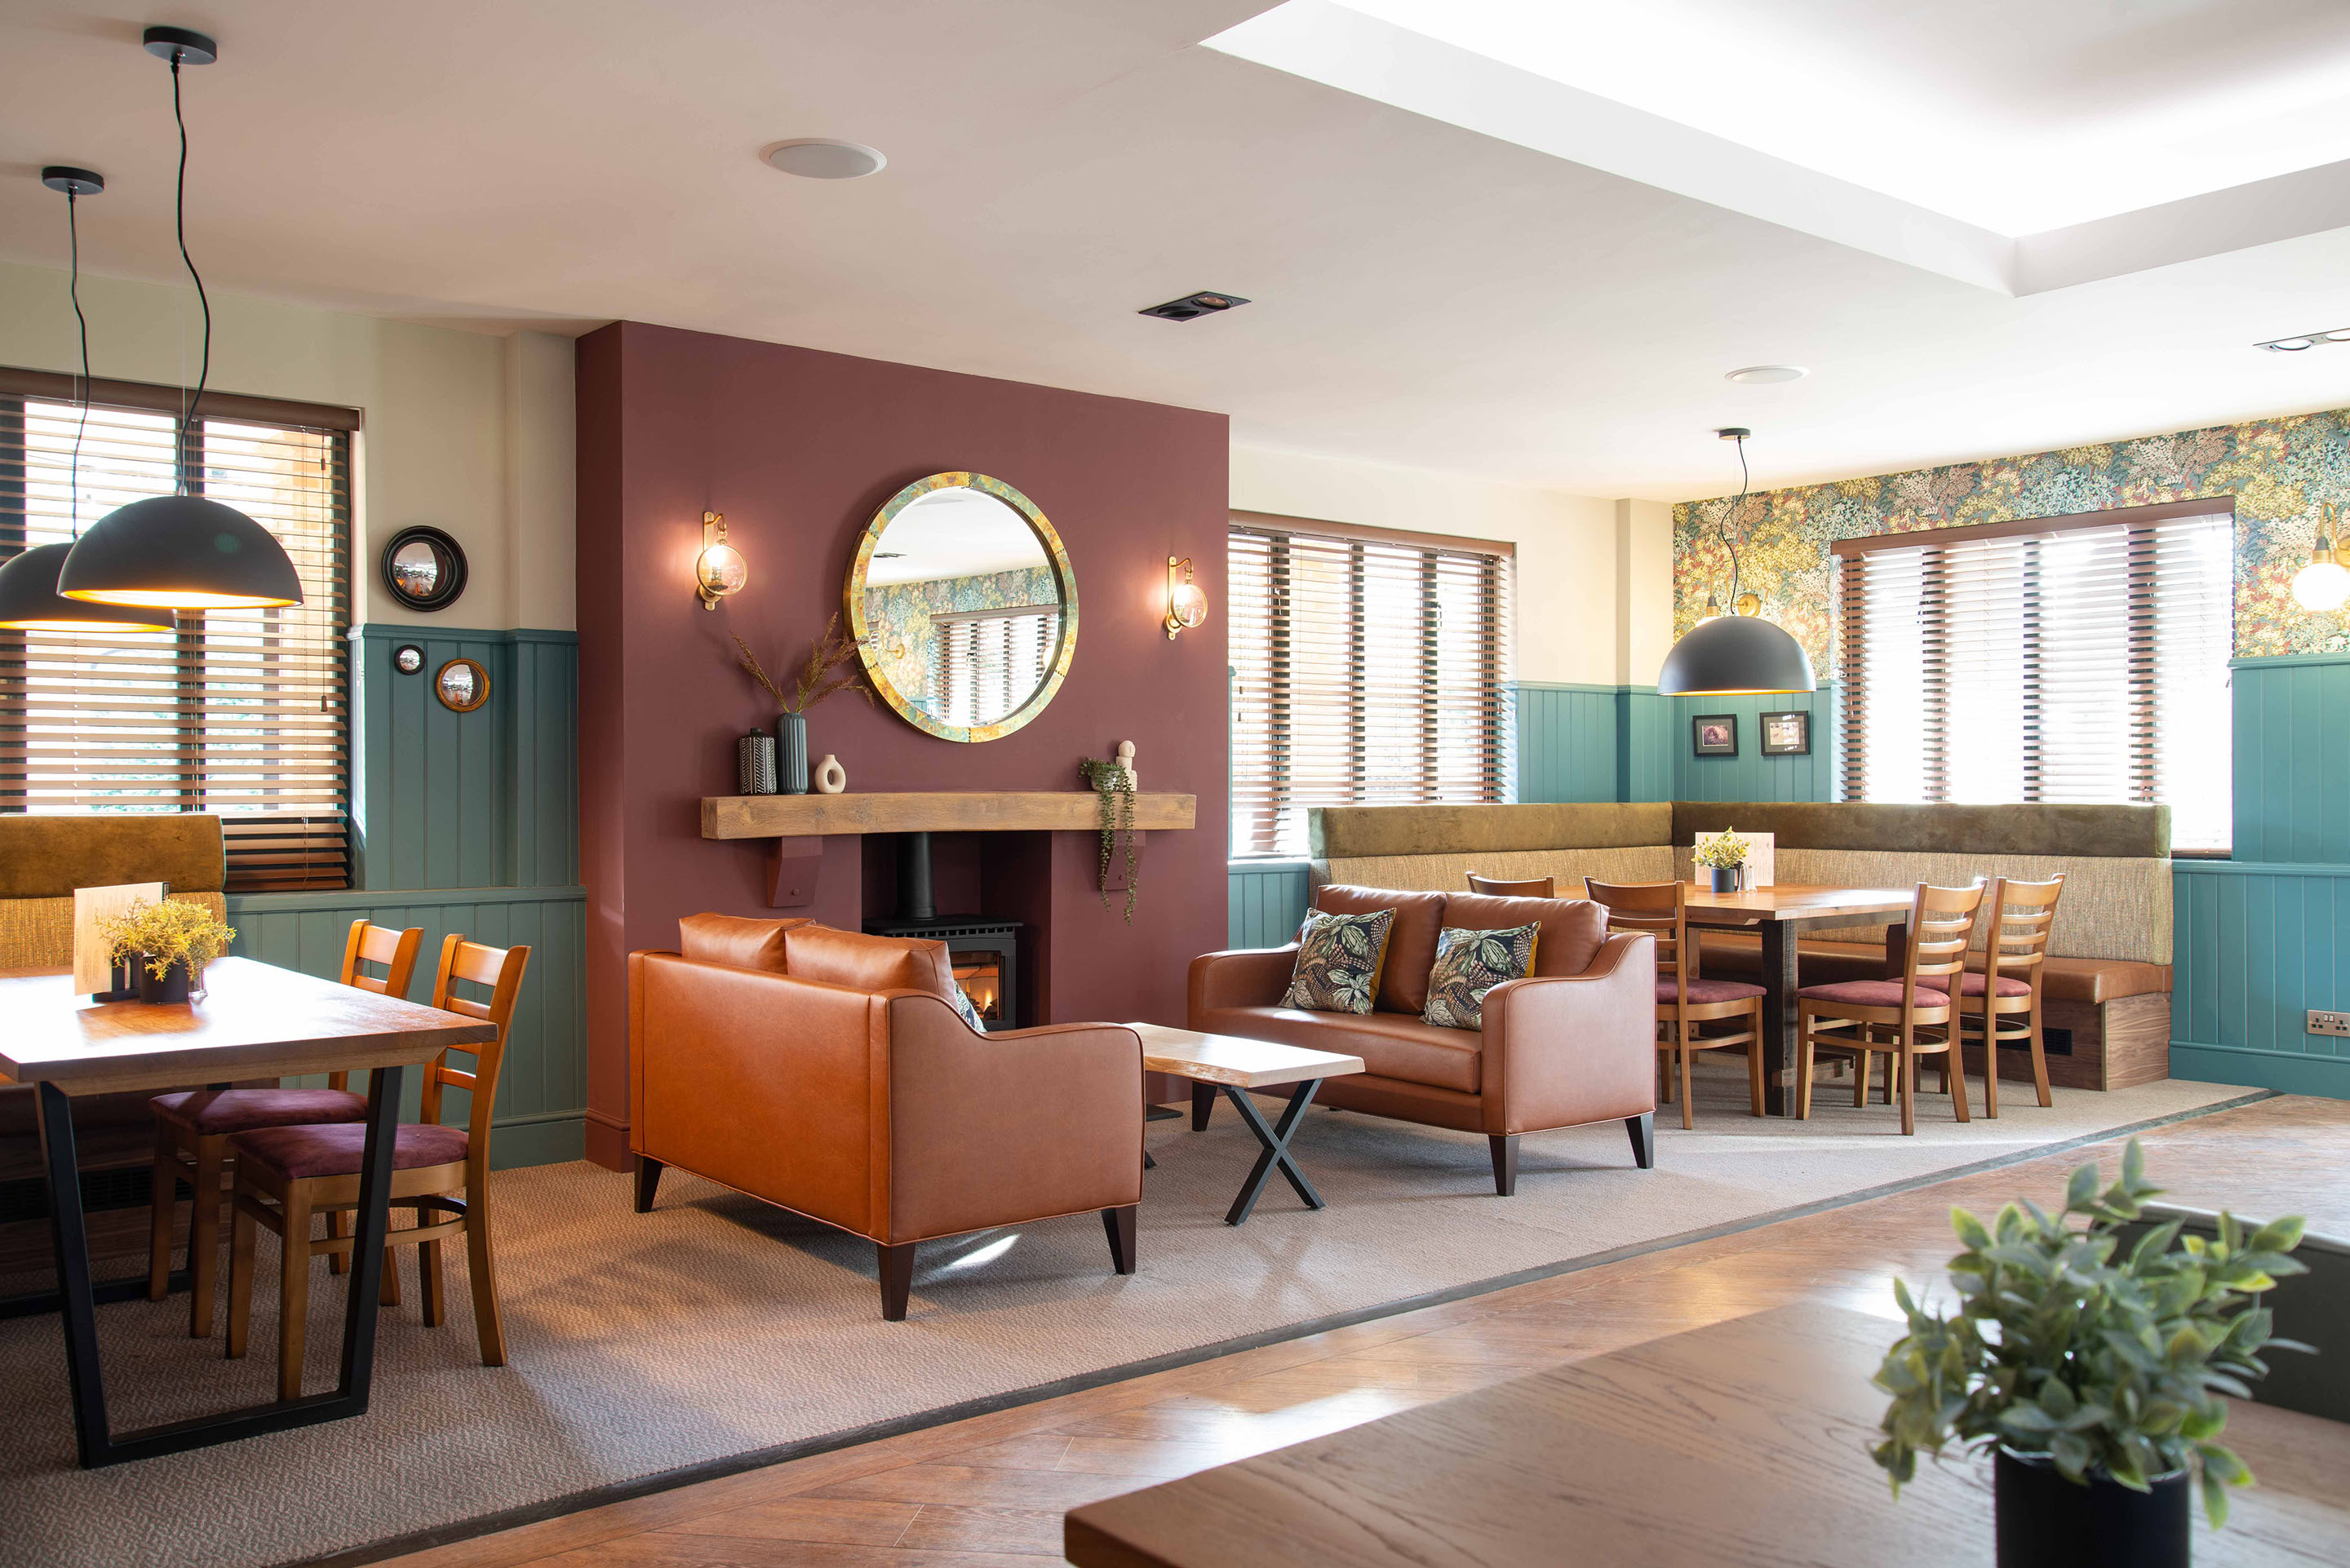 A full view of the fireside area with two sofas and two large tables for family dining. Pendants hang above the tables to create an intimate setting. Part of the Bar Restaurant Interior Design at Bromsgrove Golf Centre